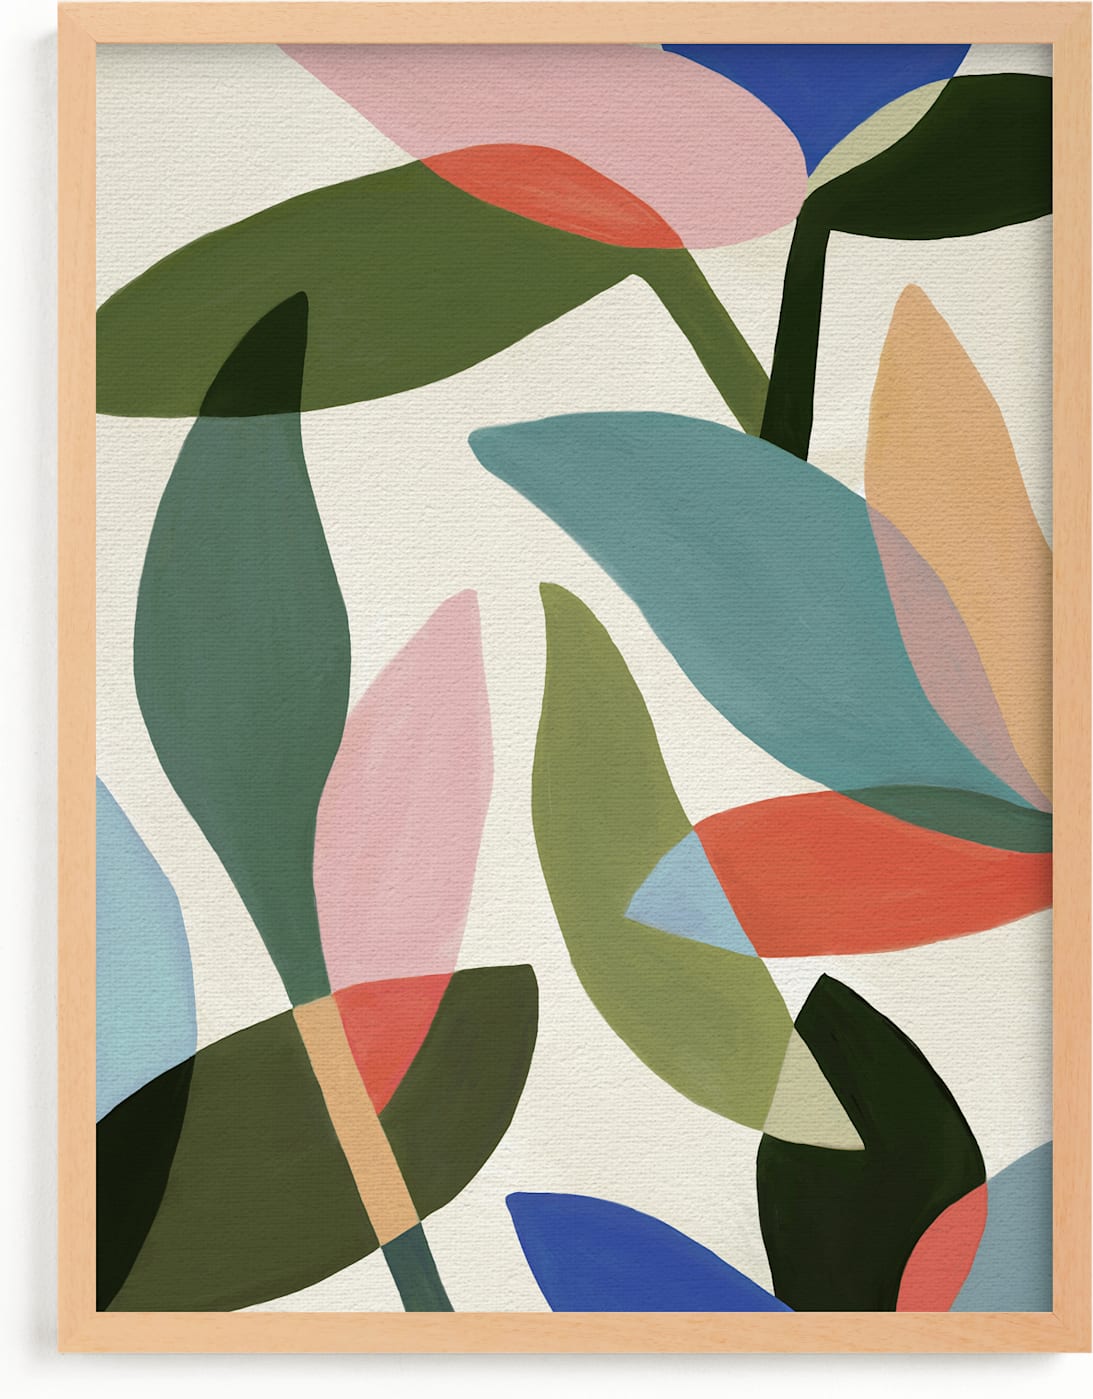 This is a blue, orange, green art by Katherine Moynagh called Garden in Bloom.